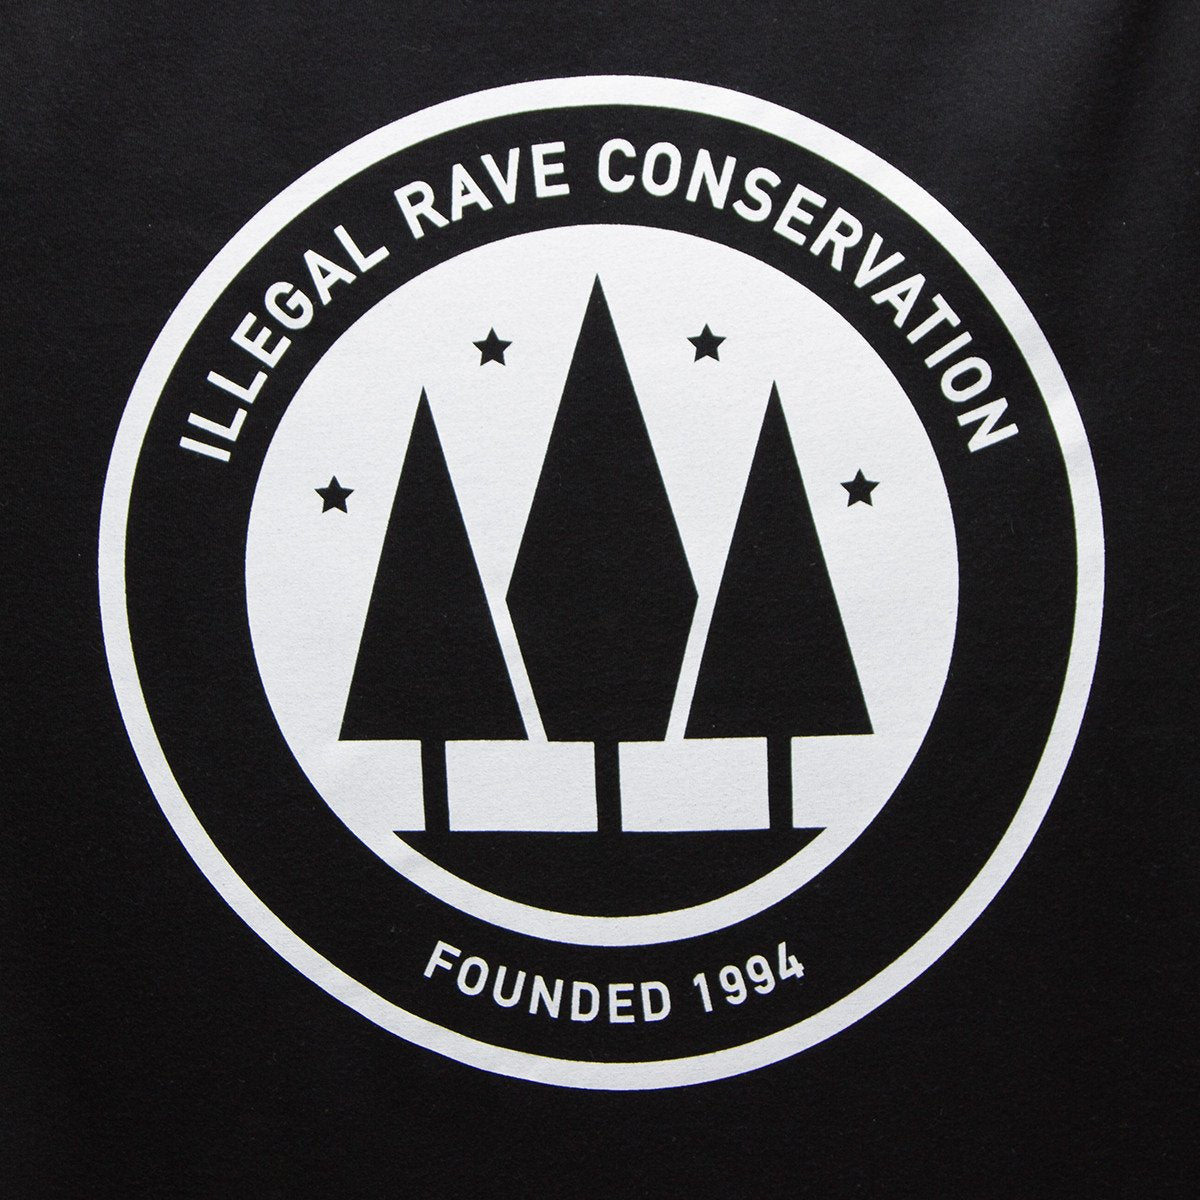 Illegal Rave Conservation - Jersey Shorts - Black - Wasted Heroes